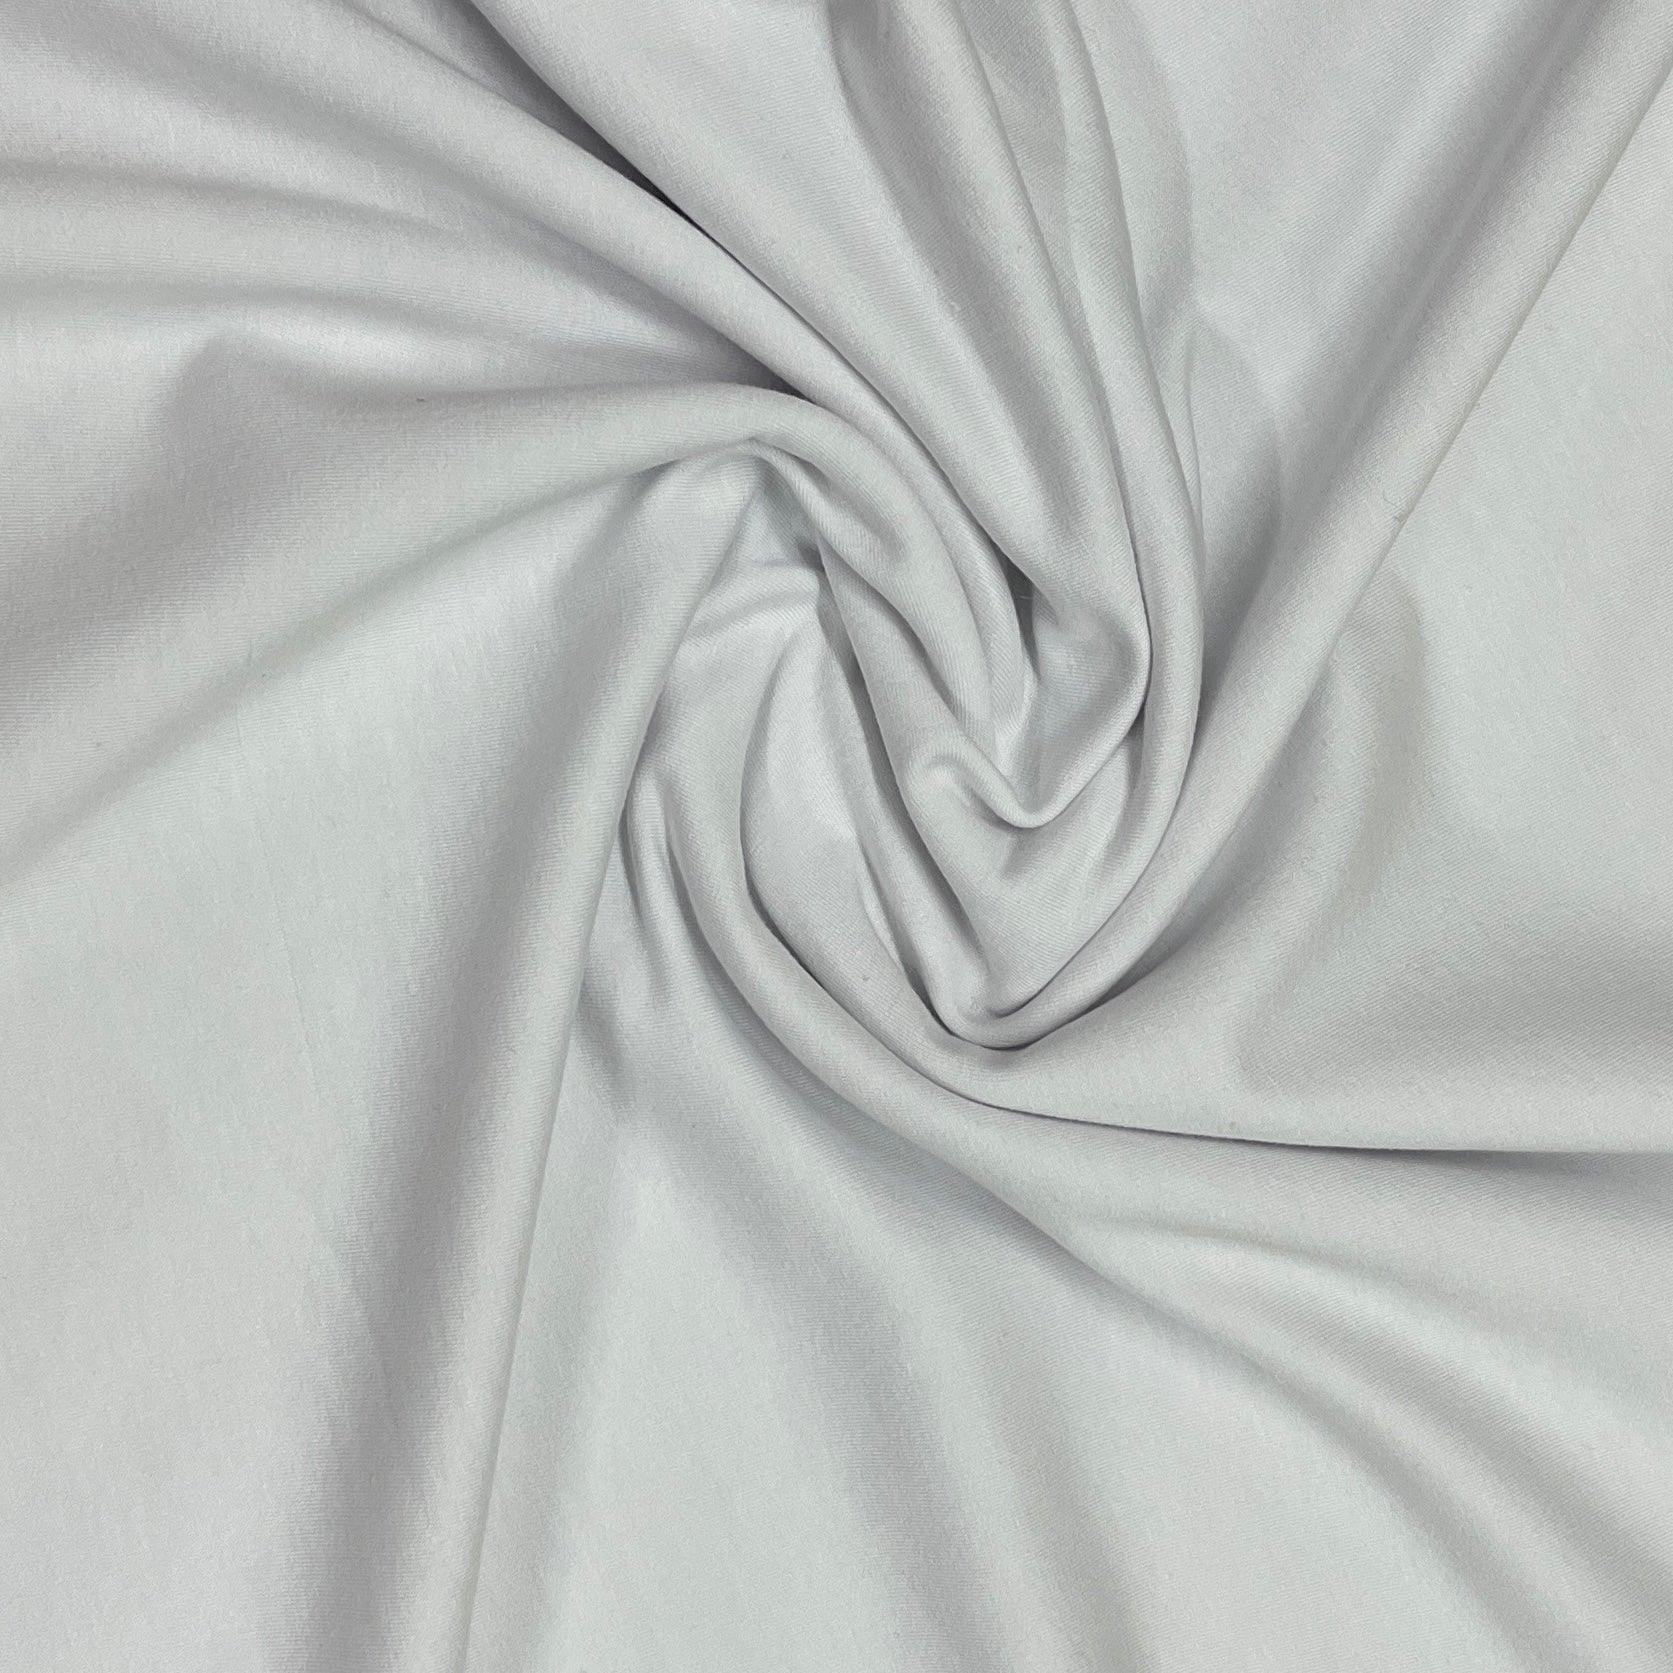 White Bamboo Stretch Fleece Fabric - 290 GSM - Knit in the USA, $12.60/yd - Rolls - Nature's Fabrics